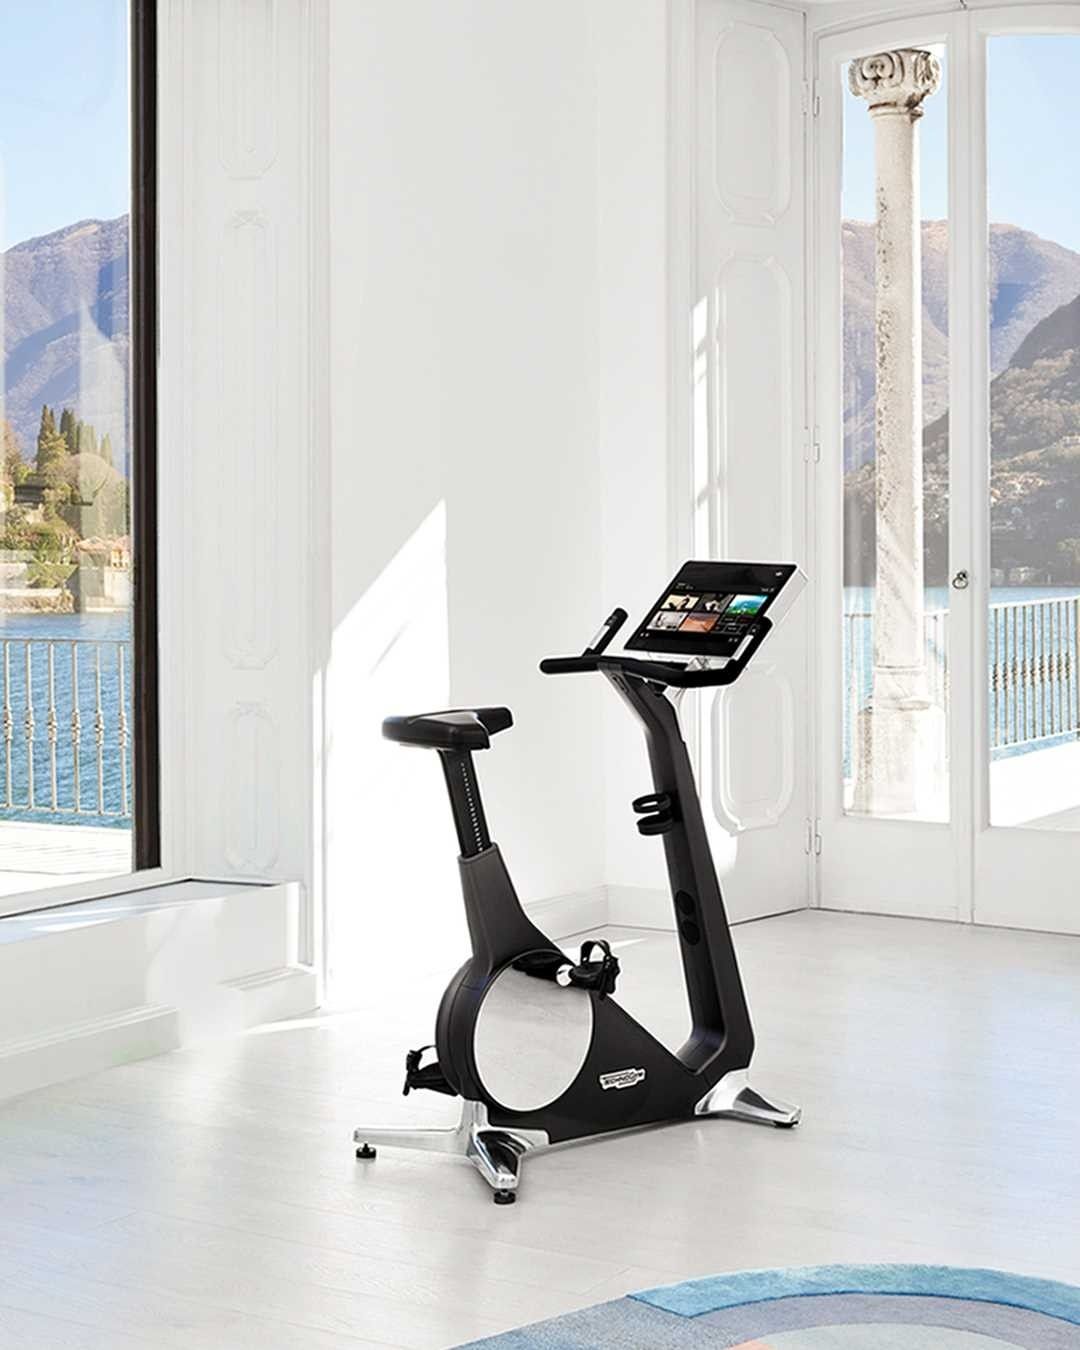 There’s an entire range of Technogym equipment at Euro Creations.